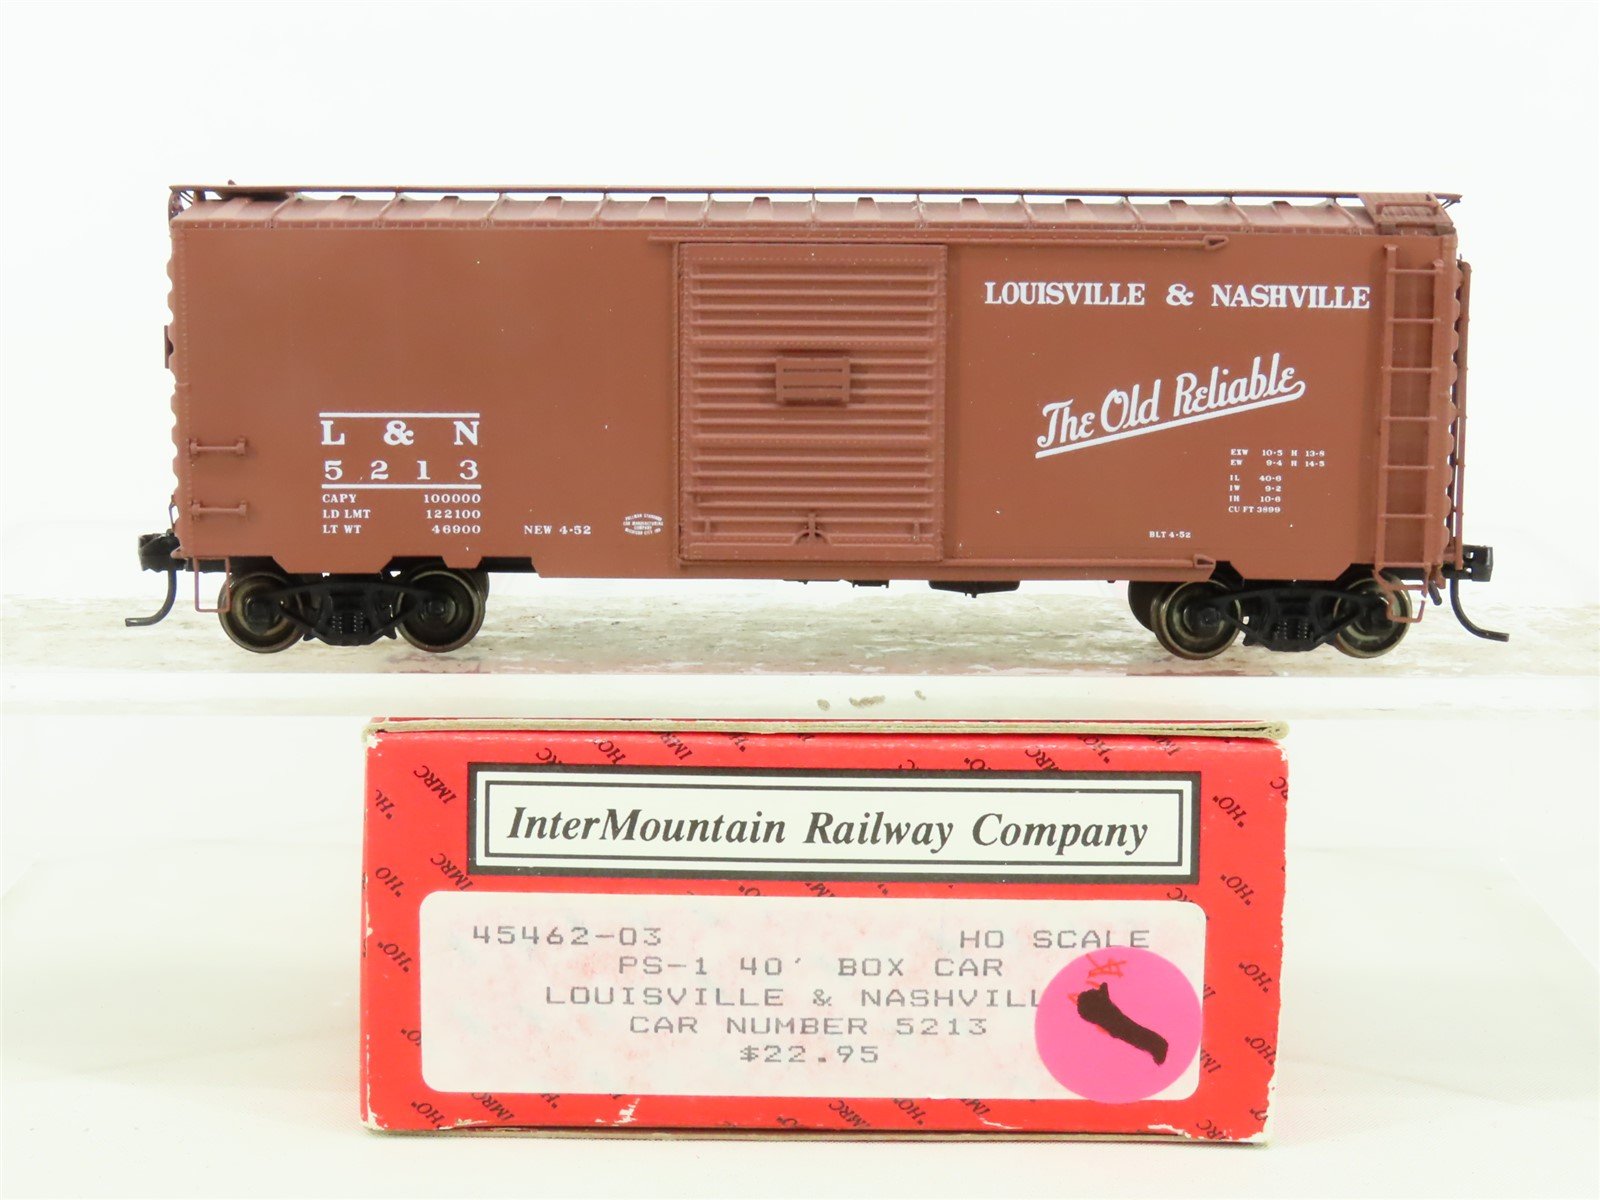 HO Scale InterMountain 45462-03 L&N "The Old Reliable" 40' Steel Box Car #5213